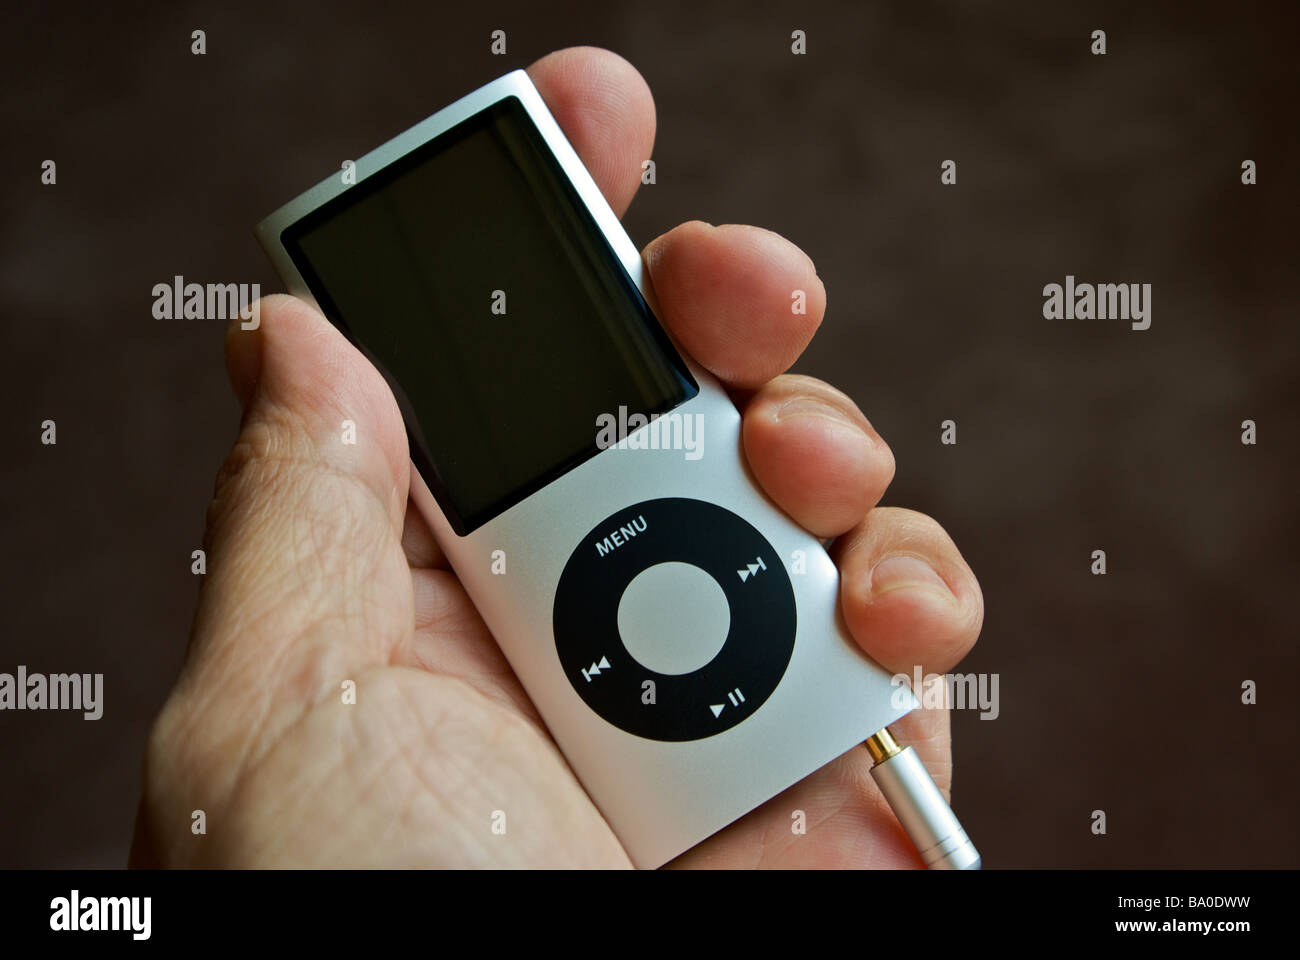 Hand holding Apple iPod Nano MP3 personal portable stereo player Stock Photo